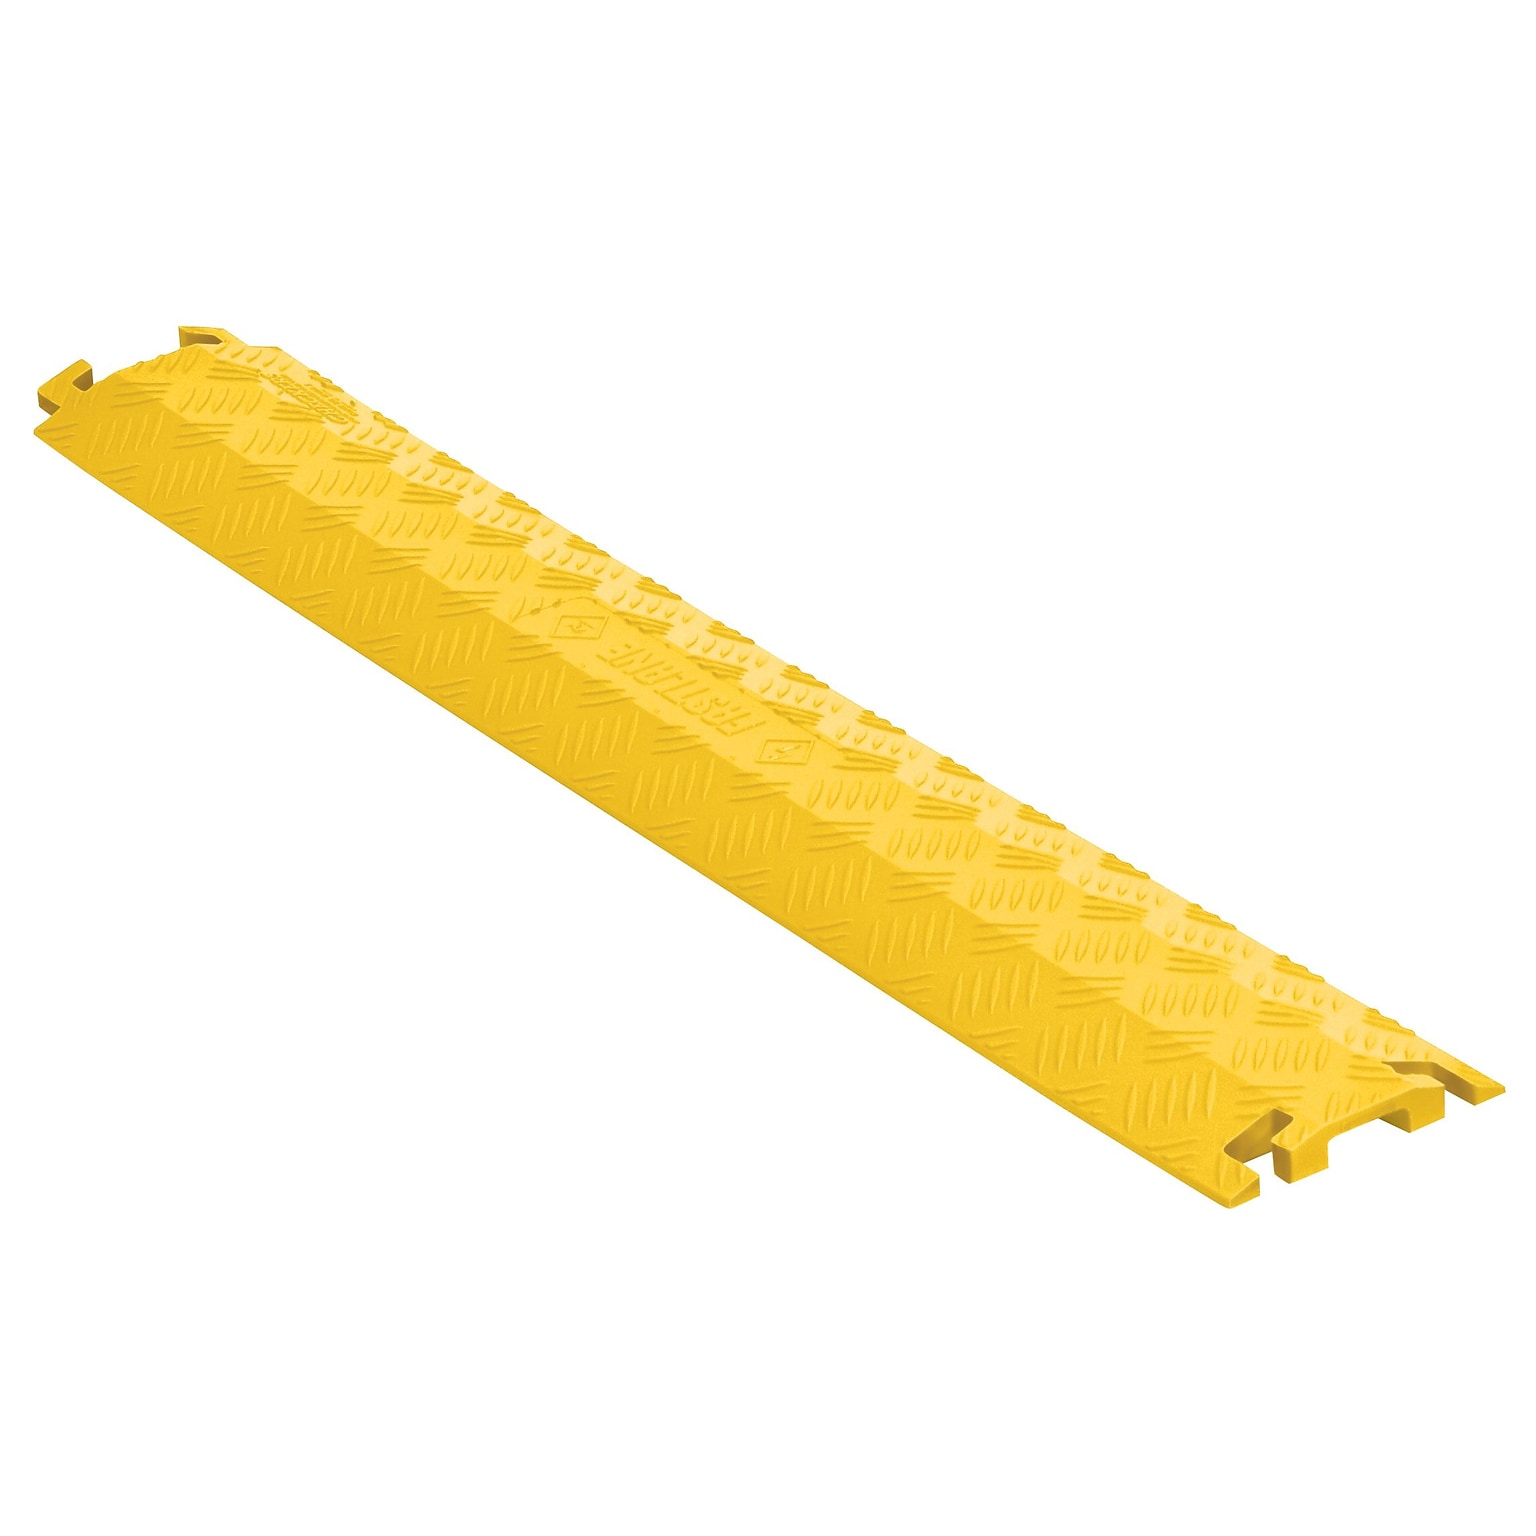 Checkers® FastLane® 4 1 Channel Fastlane Drop-Over Cord Cover Cable Protector, Yellow